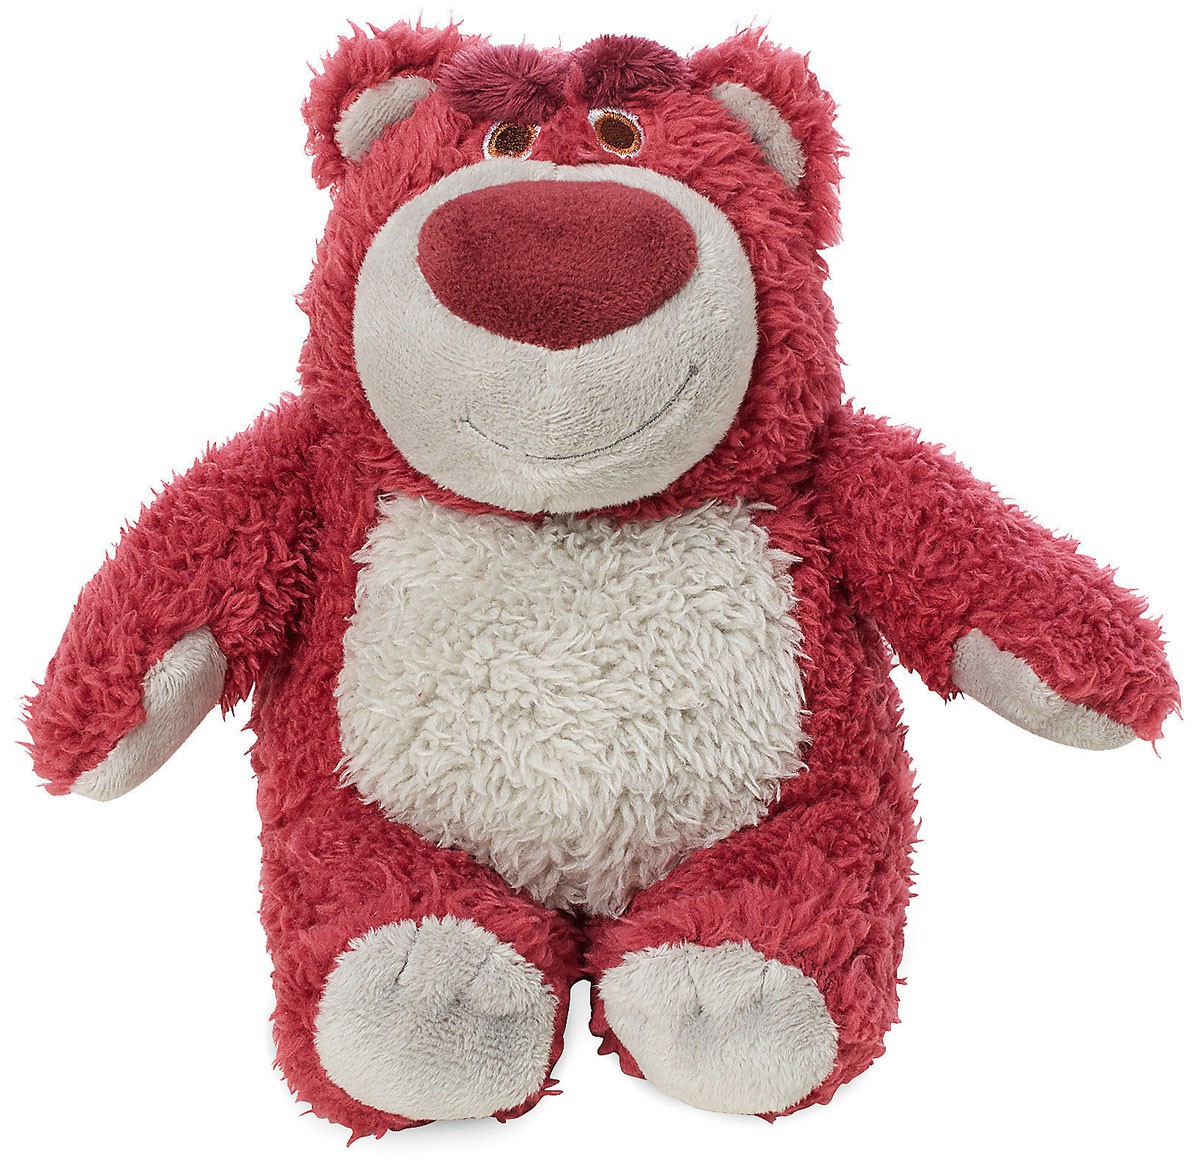 Toy Story 3 Lotso Plush [Strawberry Scented] - image 1 of 3